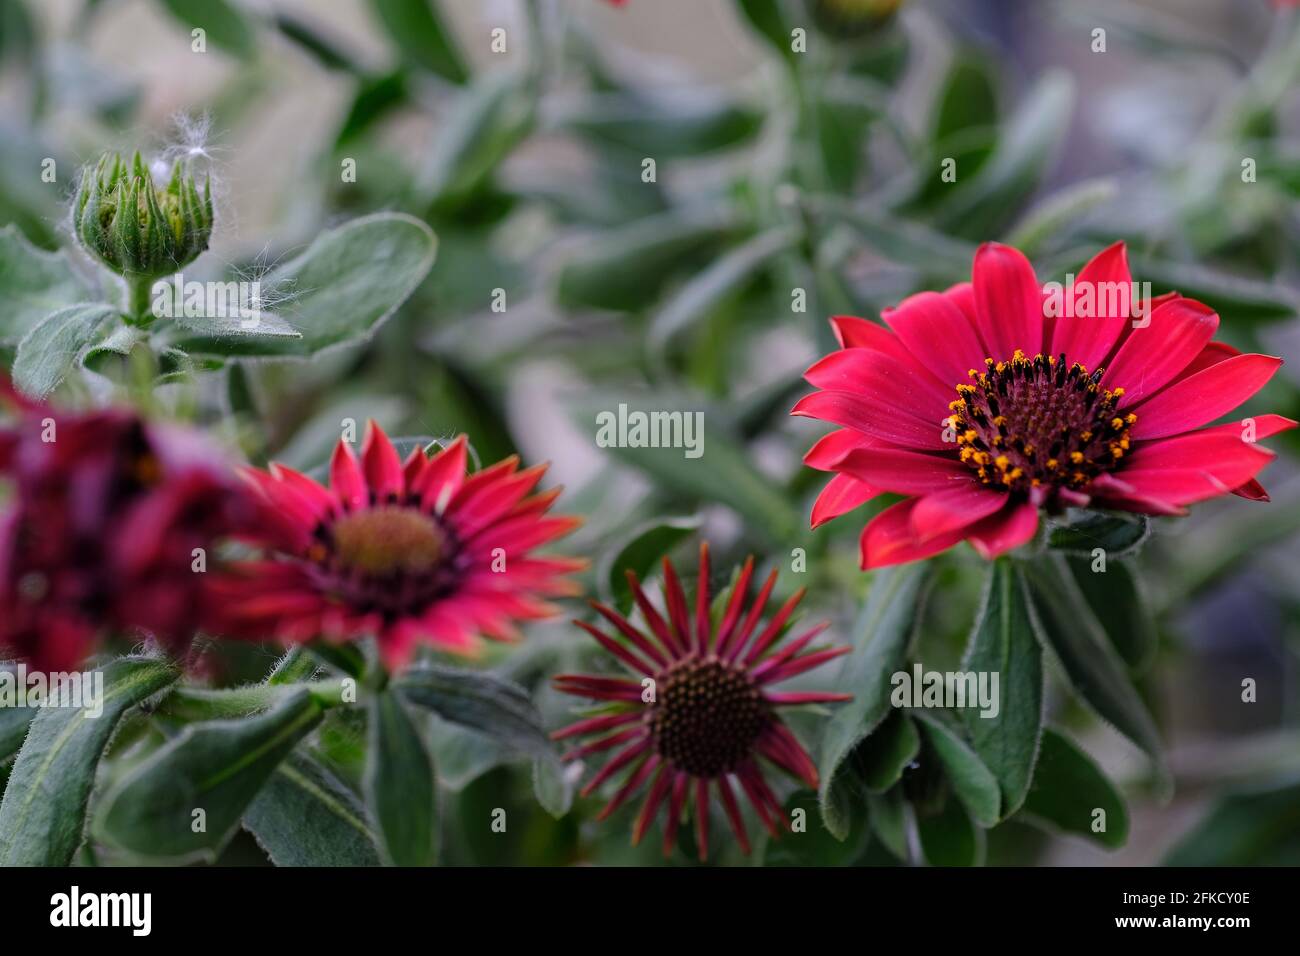 Close up of a red osteospermum flower, also known as African Daisy Stock Photo